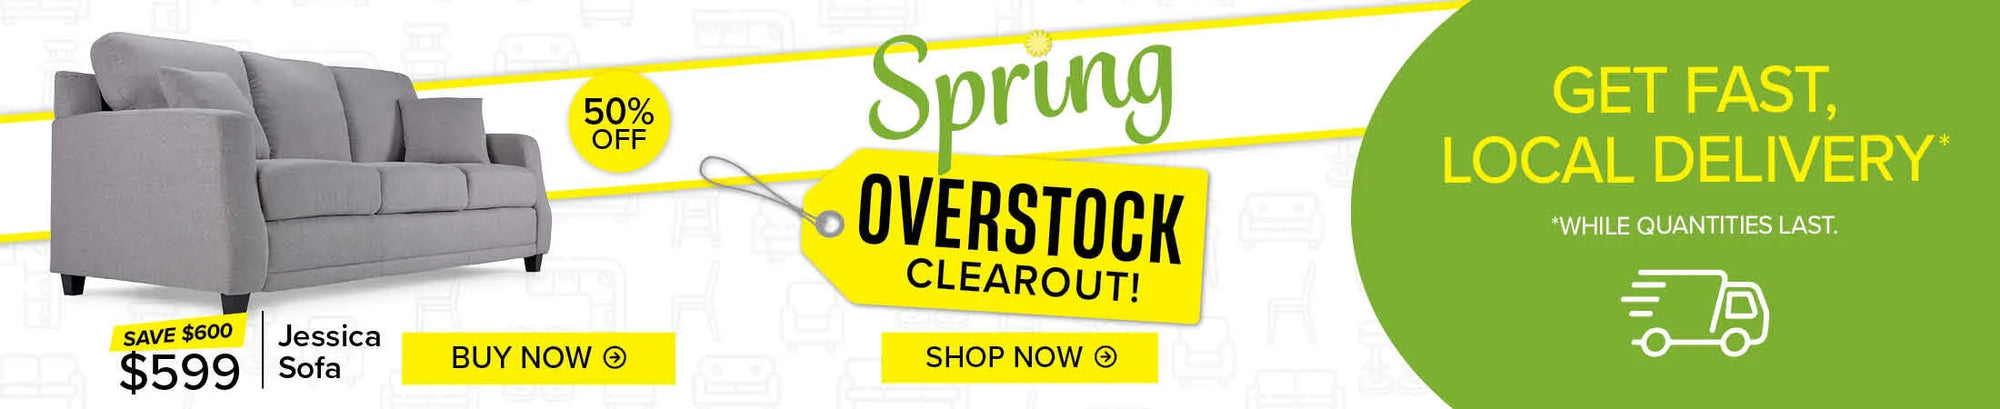 Spring overstock clearout! Shop now. 50% off Jessica Sofa now $599 buy now. Get local delivery.